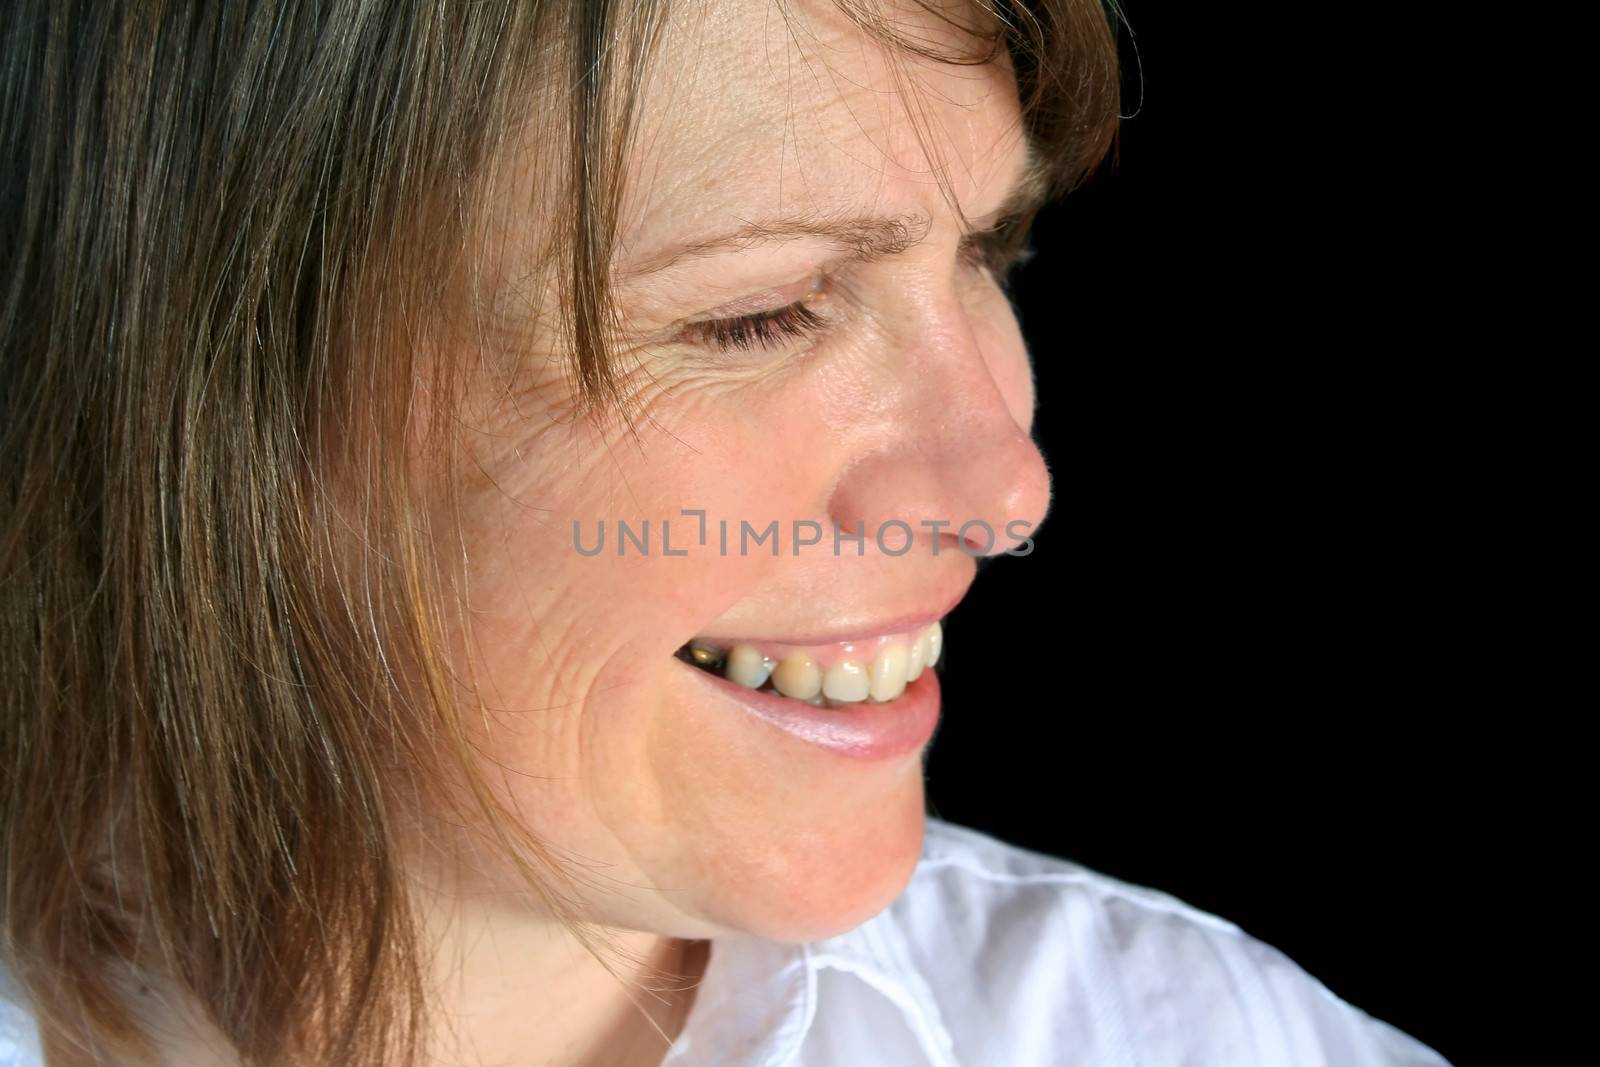 Profile close up of a middle aged female smiling.